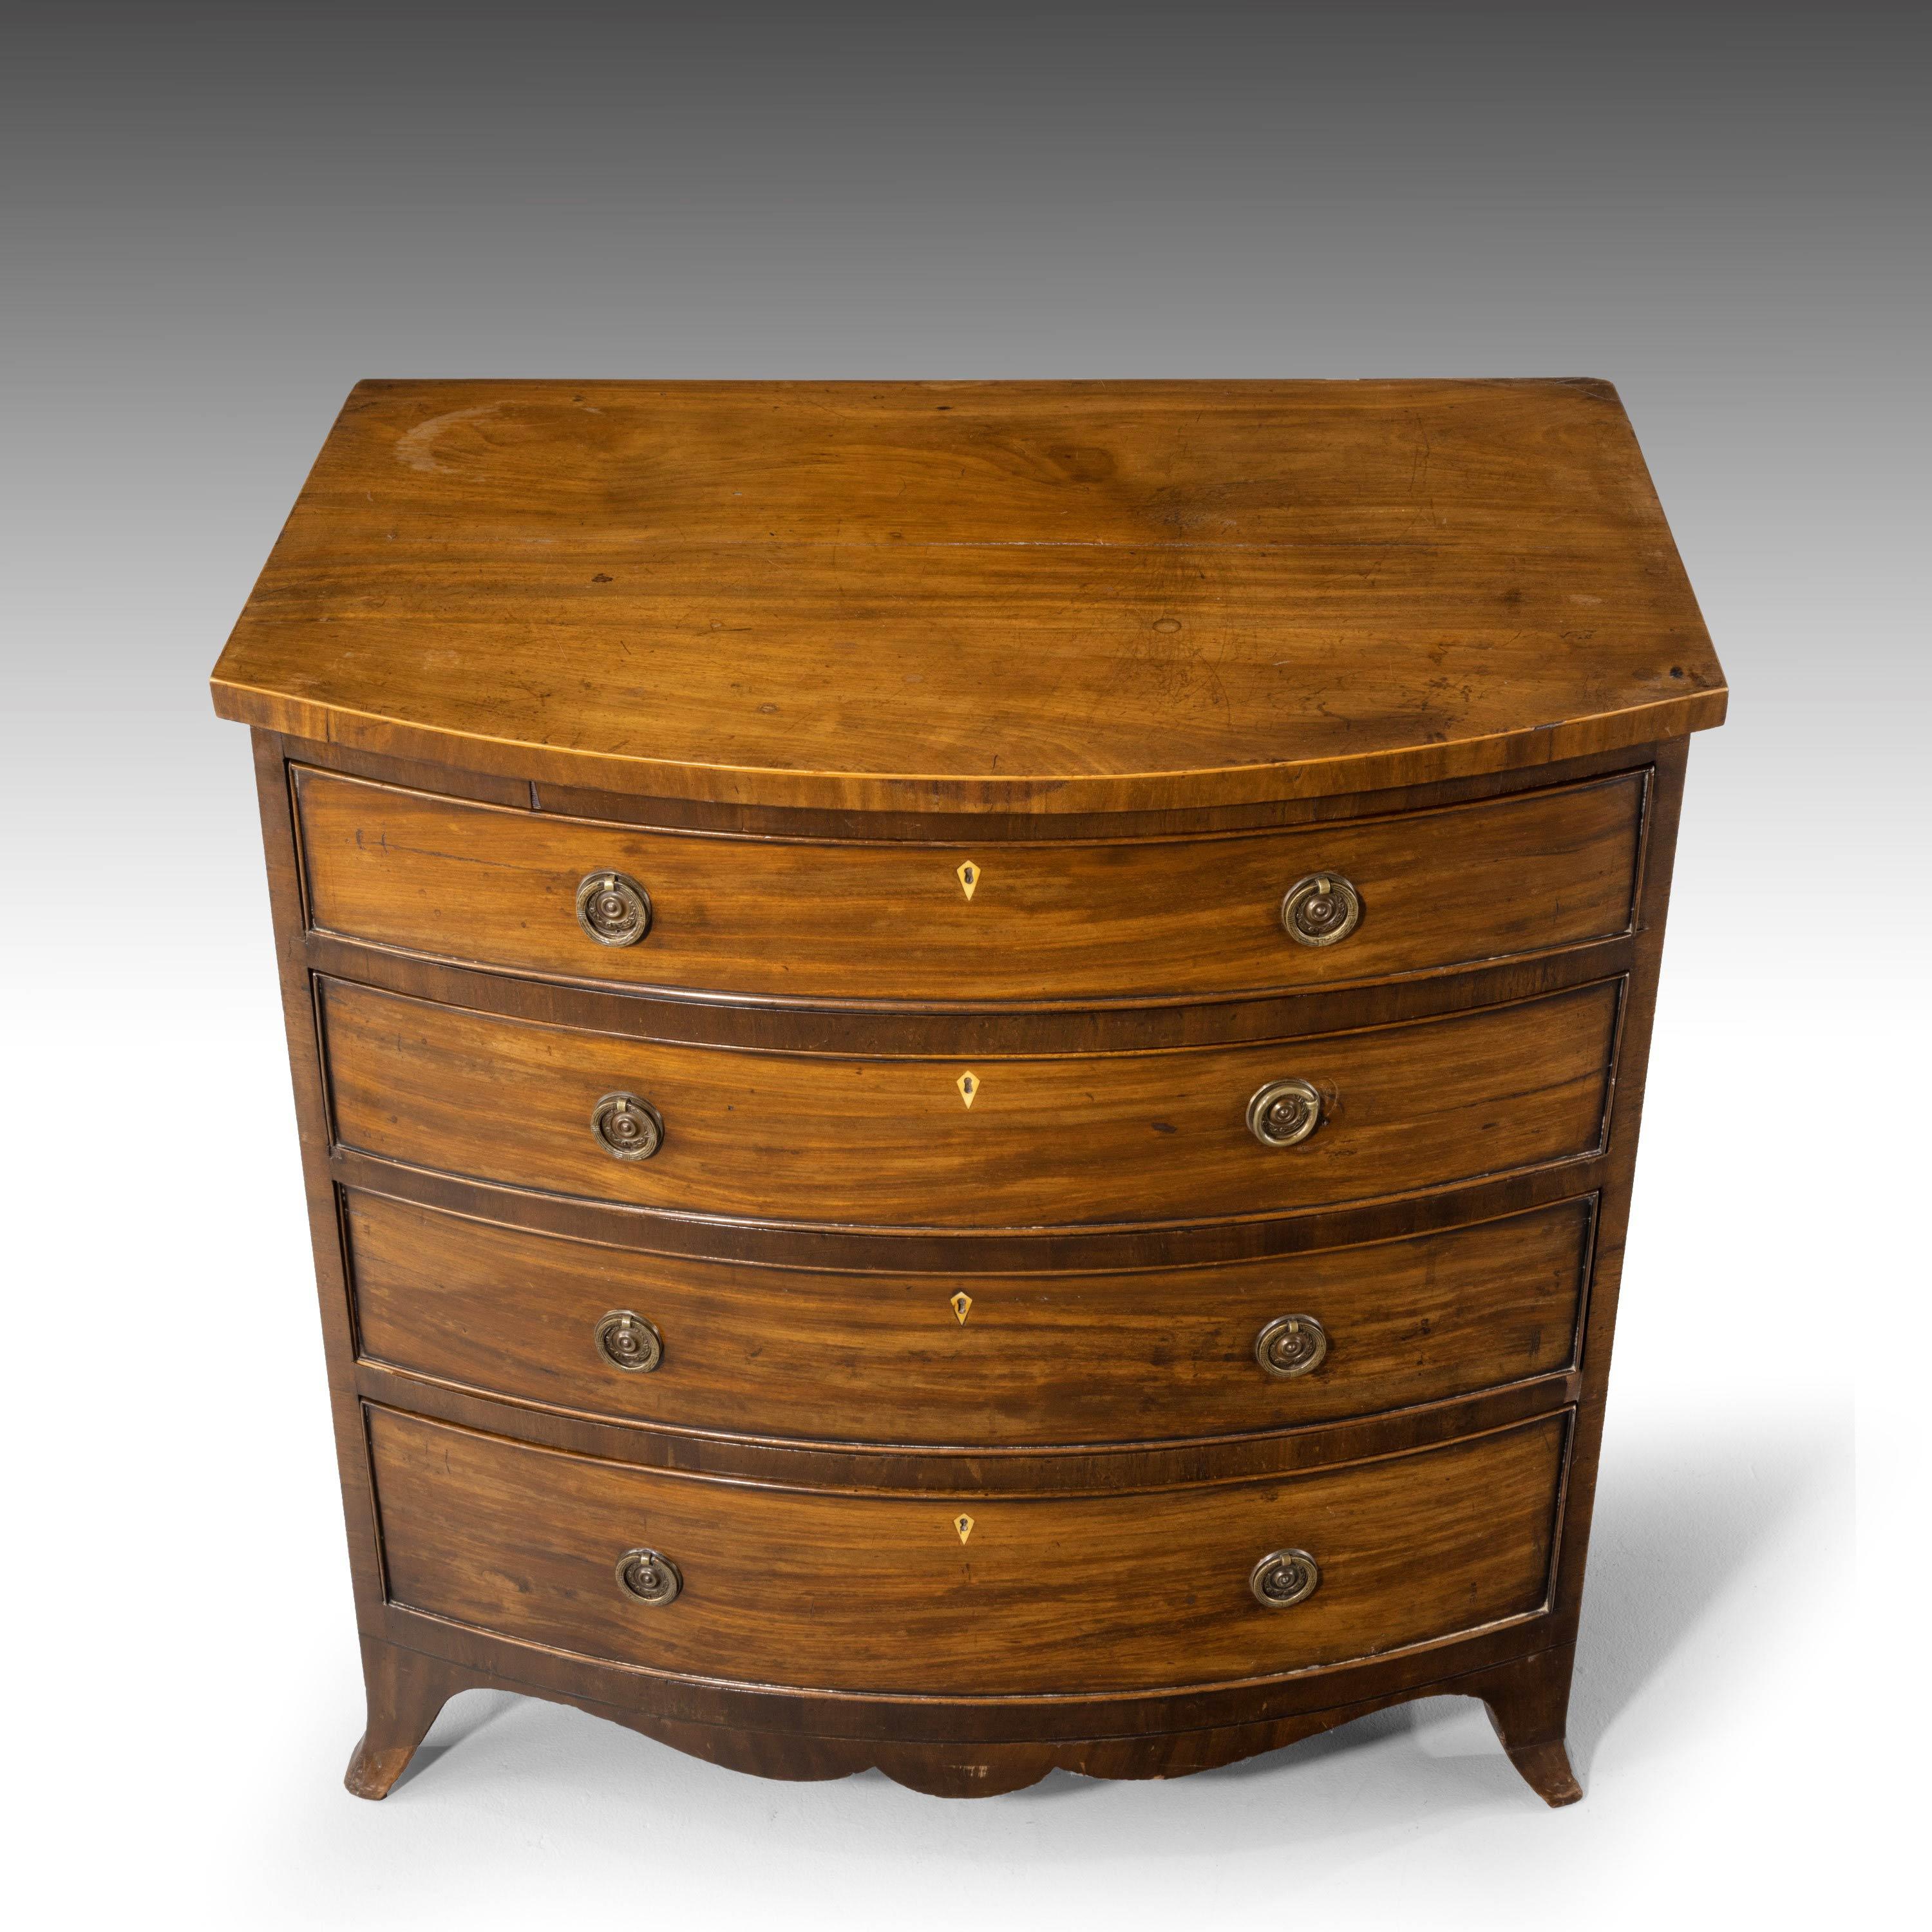 A particularly good George III period bow-fronted chest of drawers. With a strongly D-shaped front. Attractive high swept feet with minor repairs to the bottom two inches. A carcass split to the top, not to be restored, totally acceptable wear and